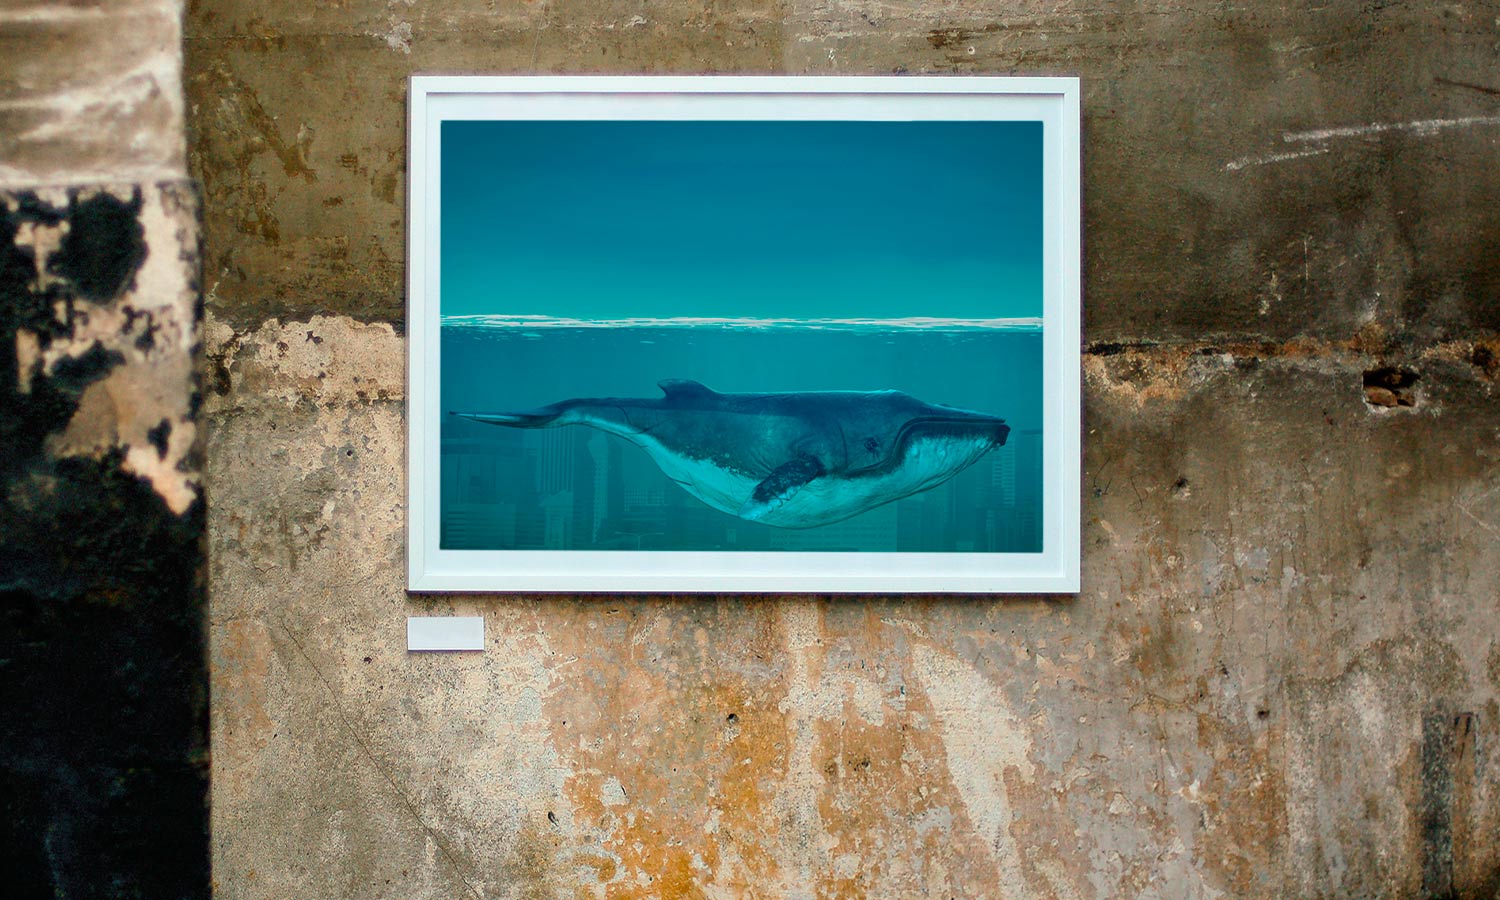 Whale in the ocean, poster  PS011